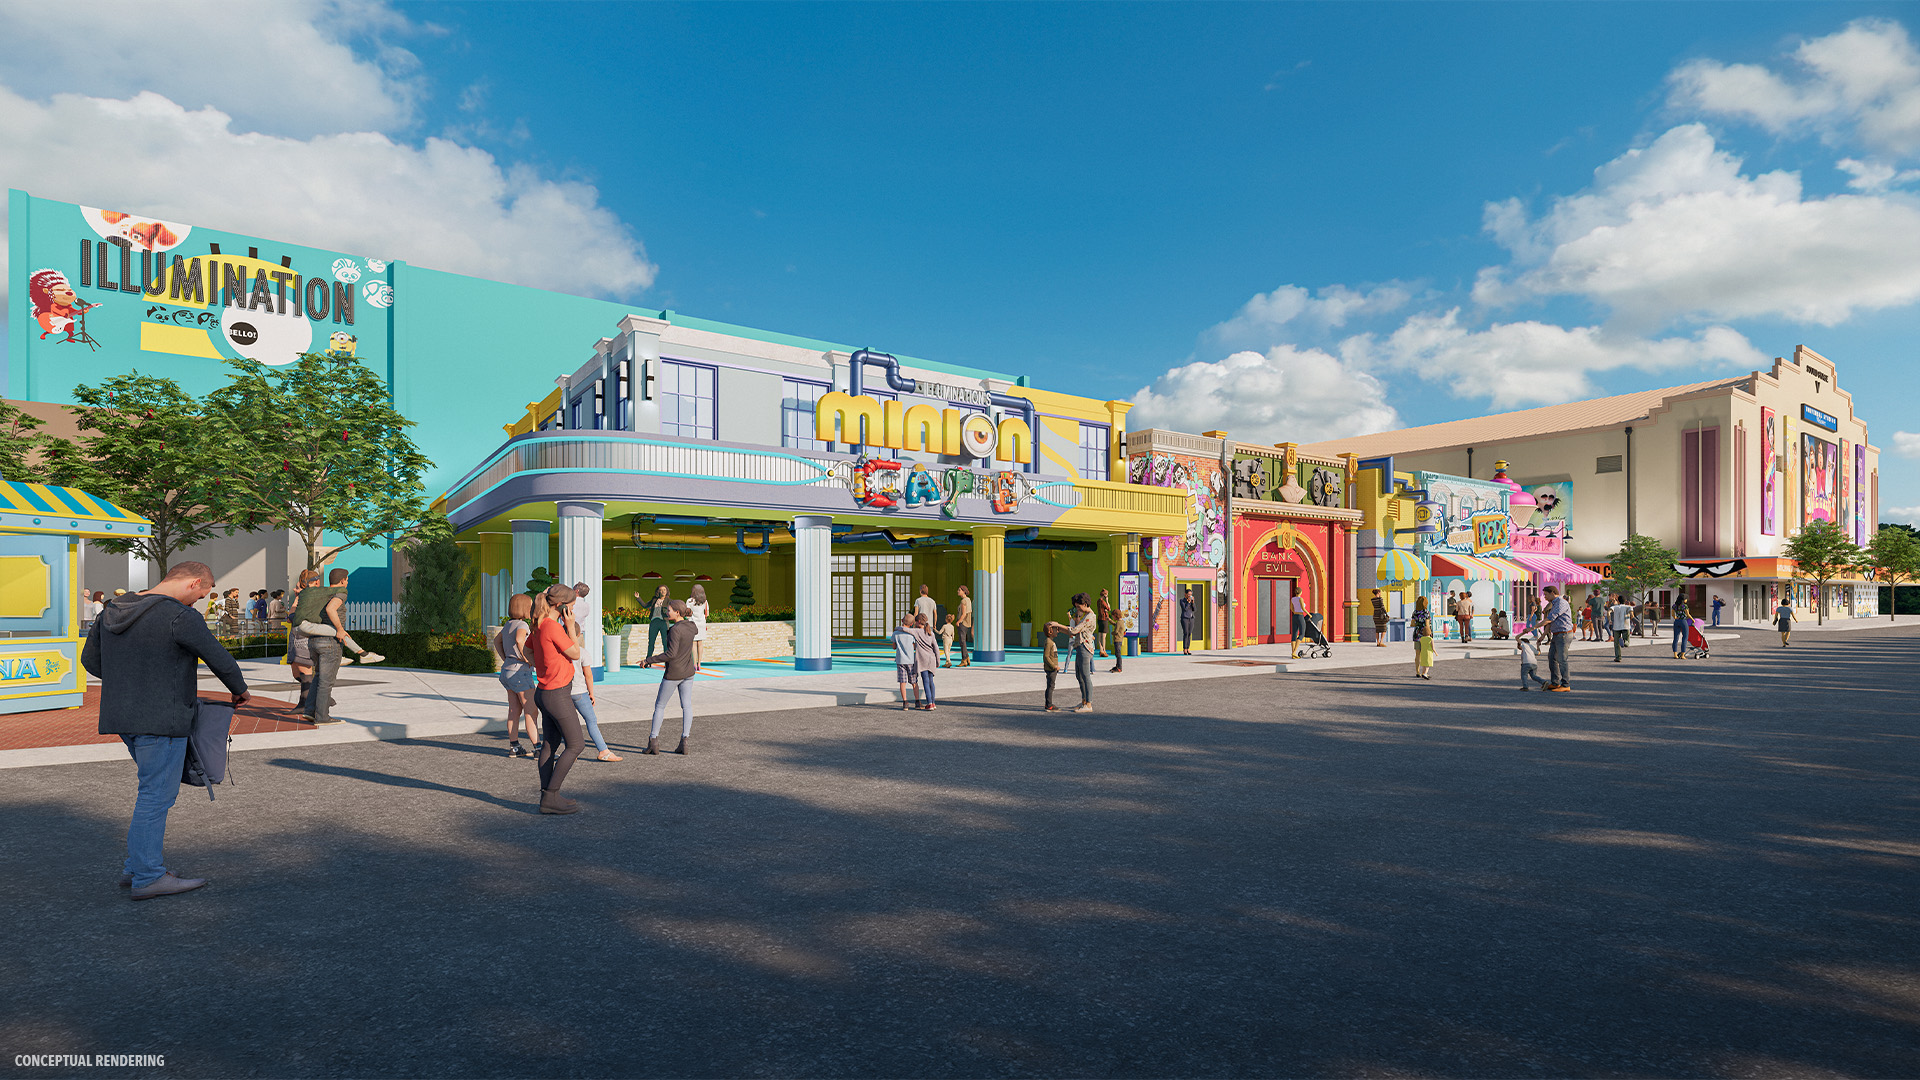 Universal is opening a Minions themed area in Orlando and it looks amazing! 